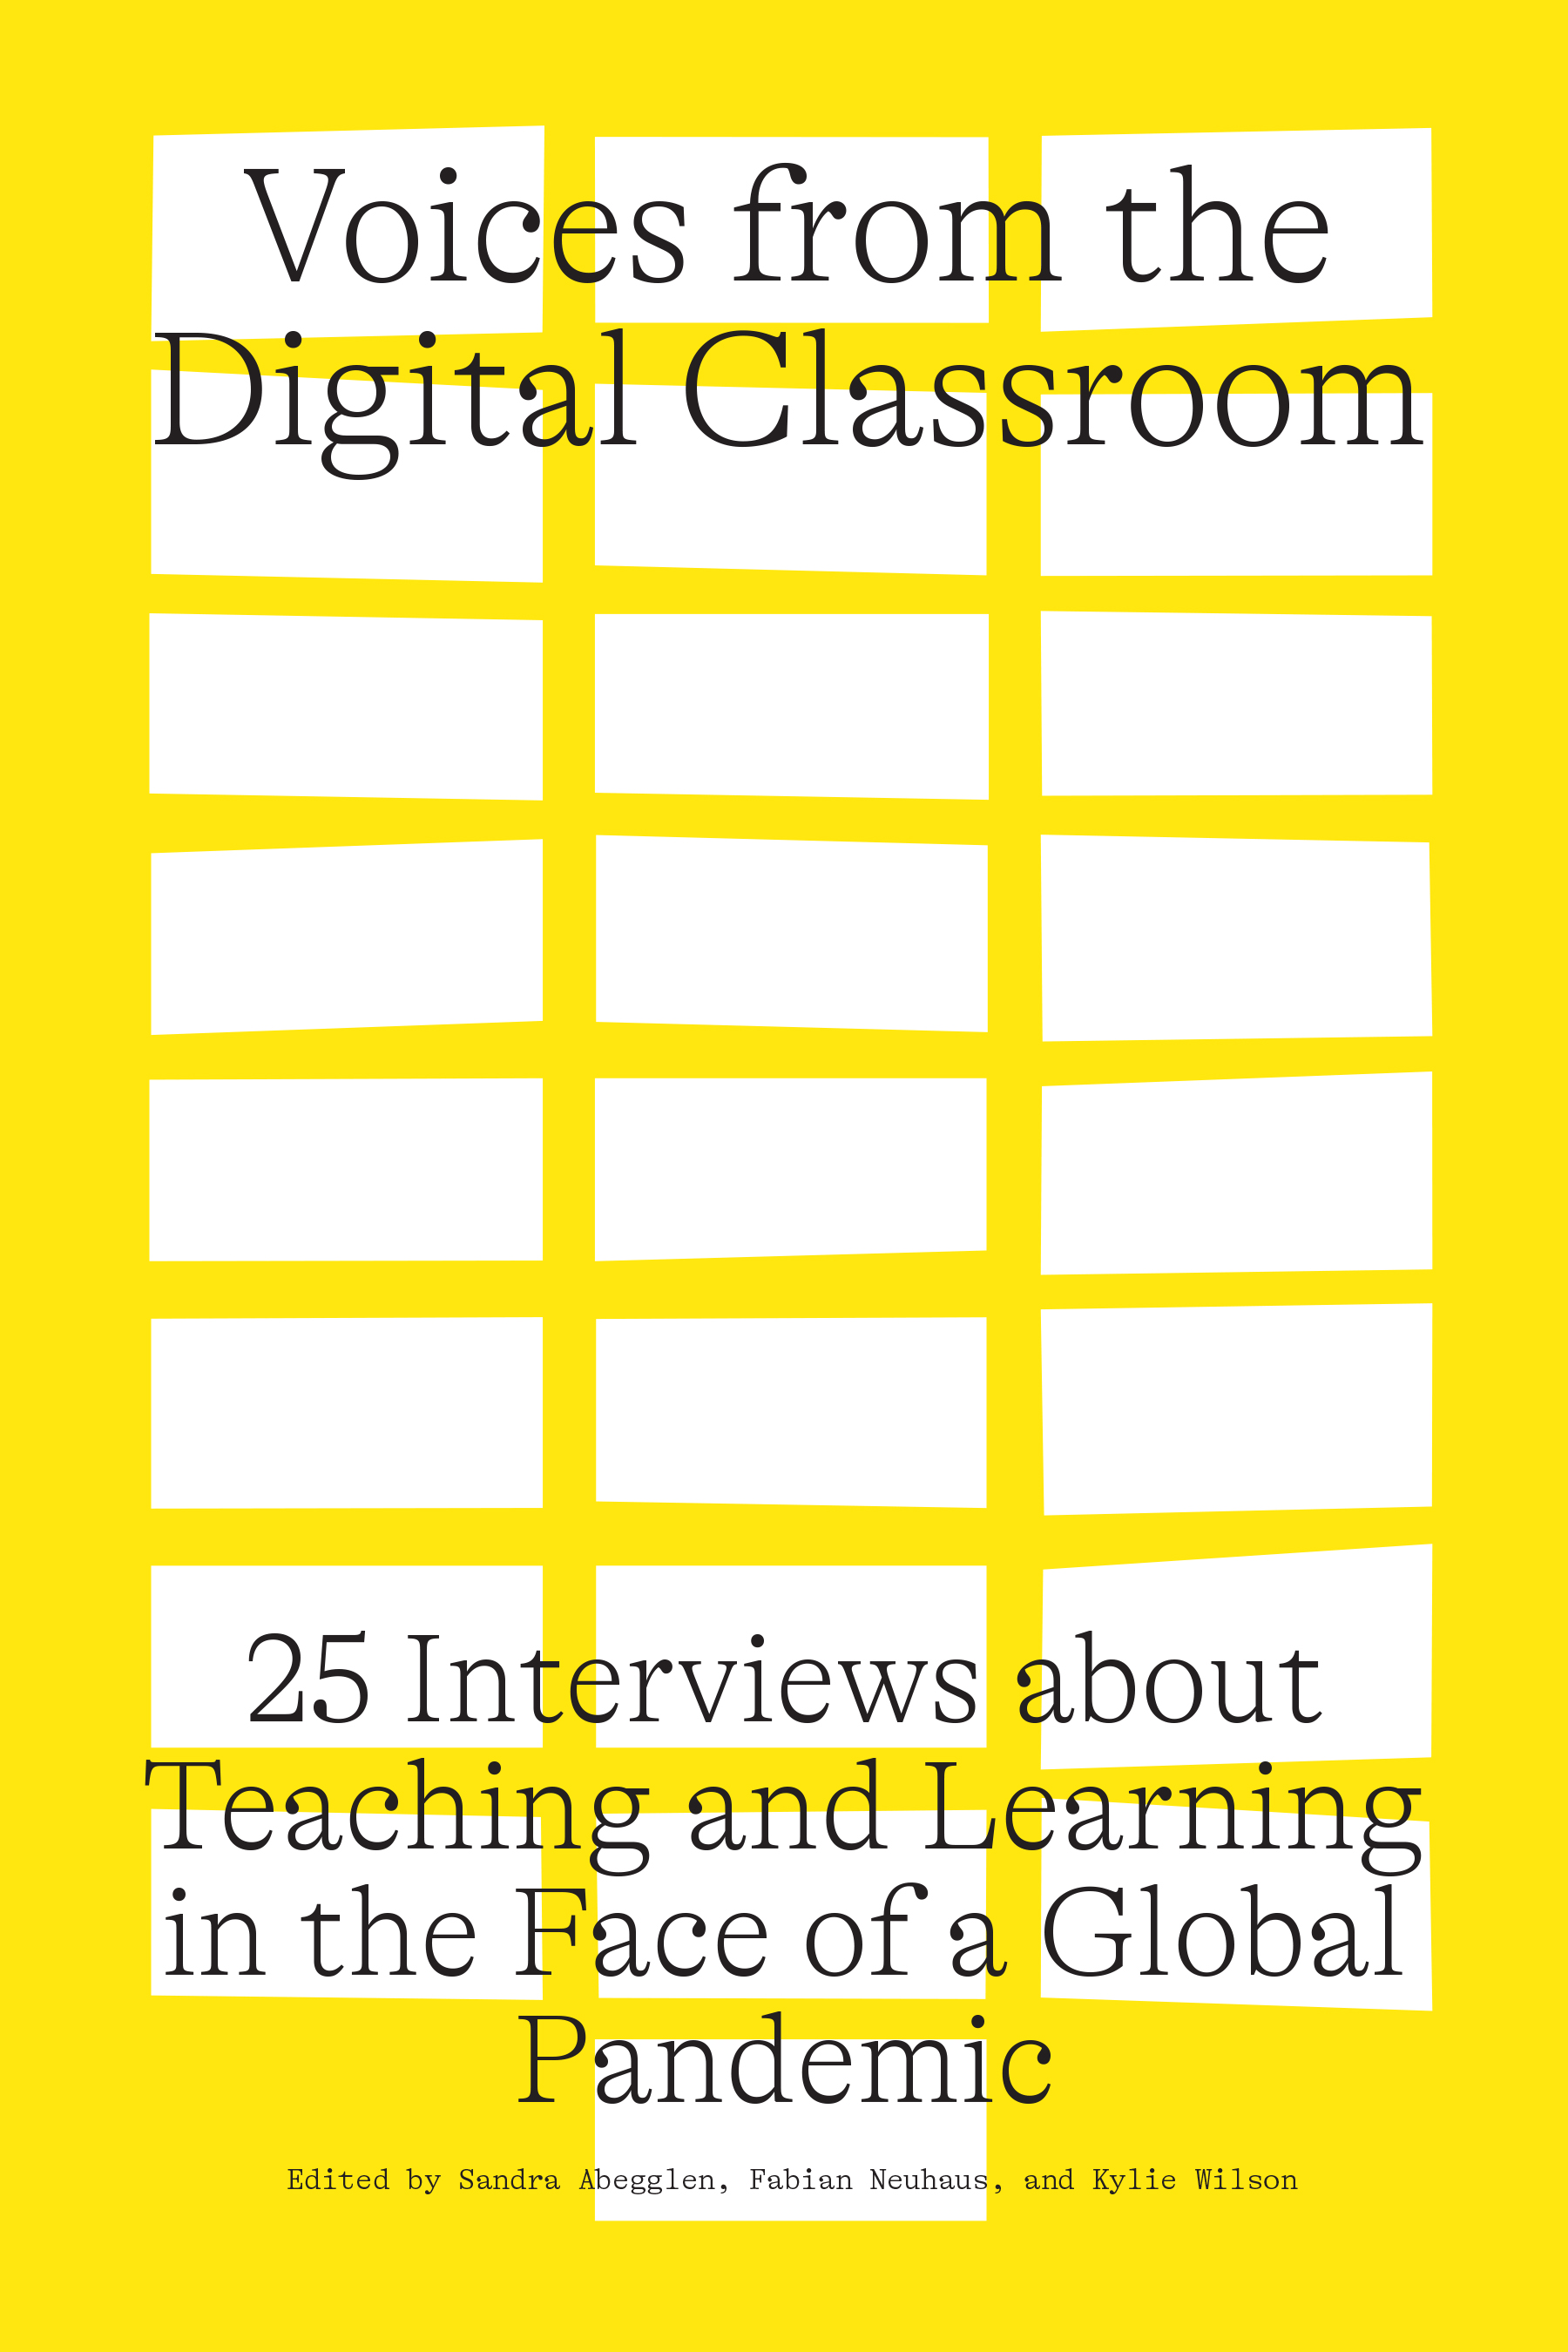 Cover Image for: Voices from the Digital Classroom